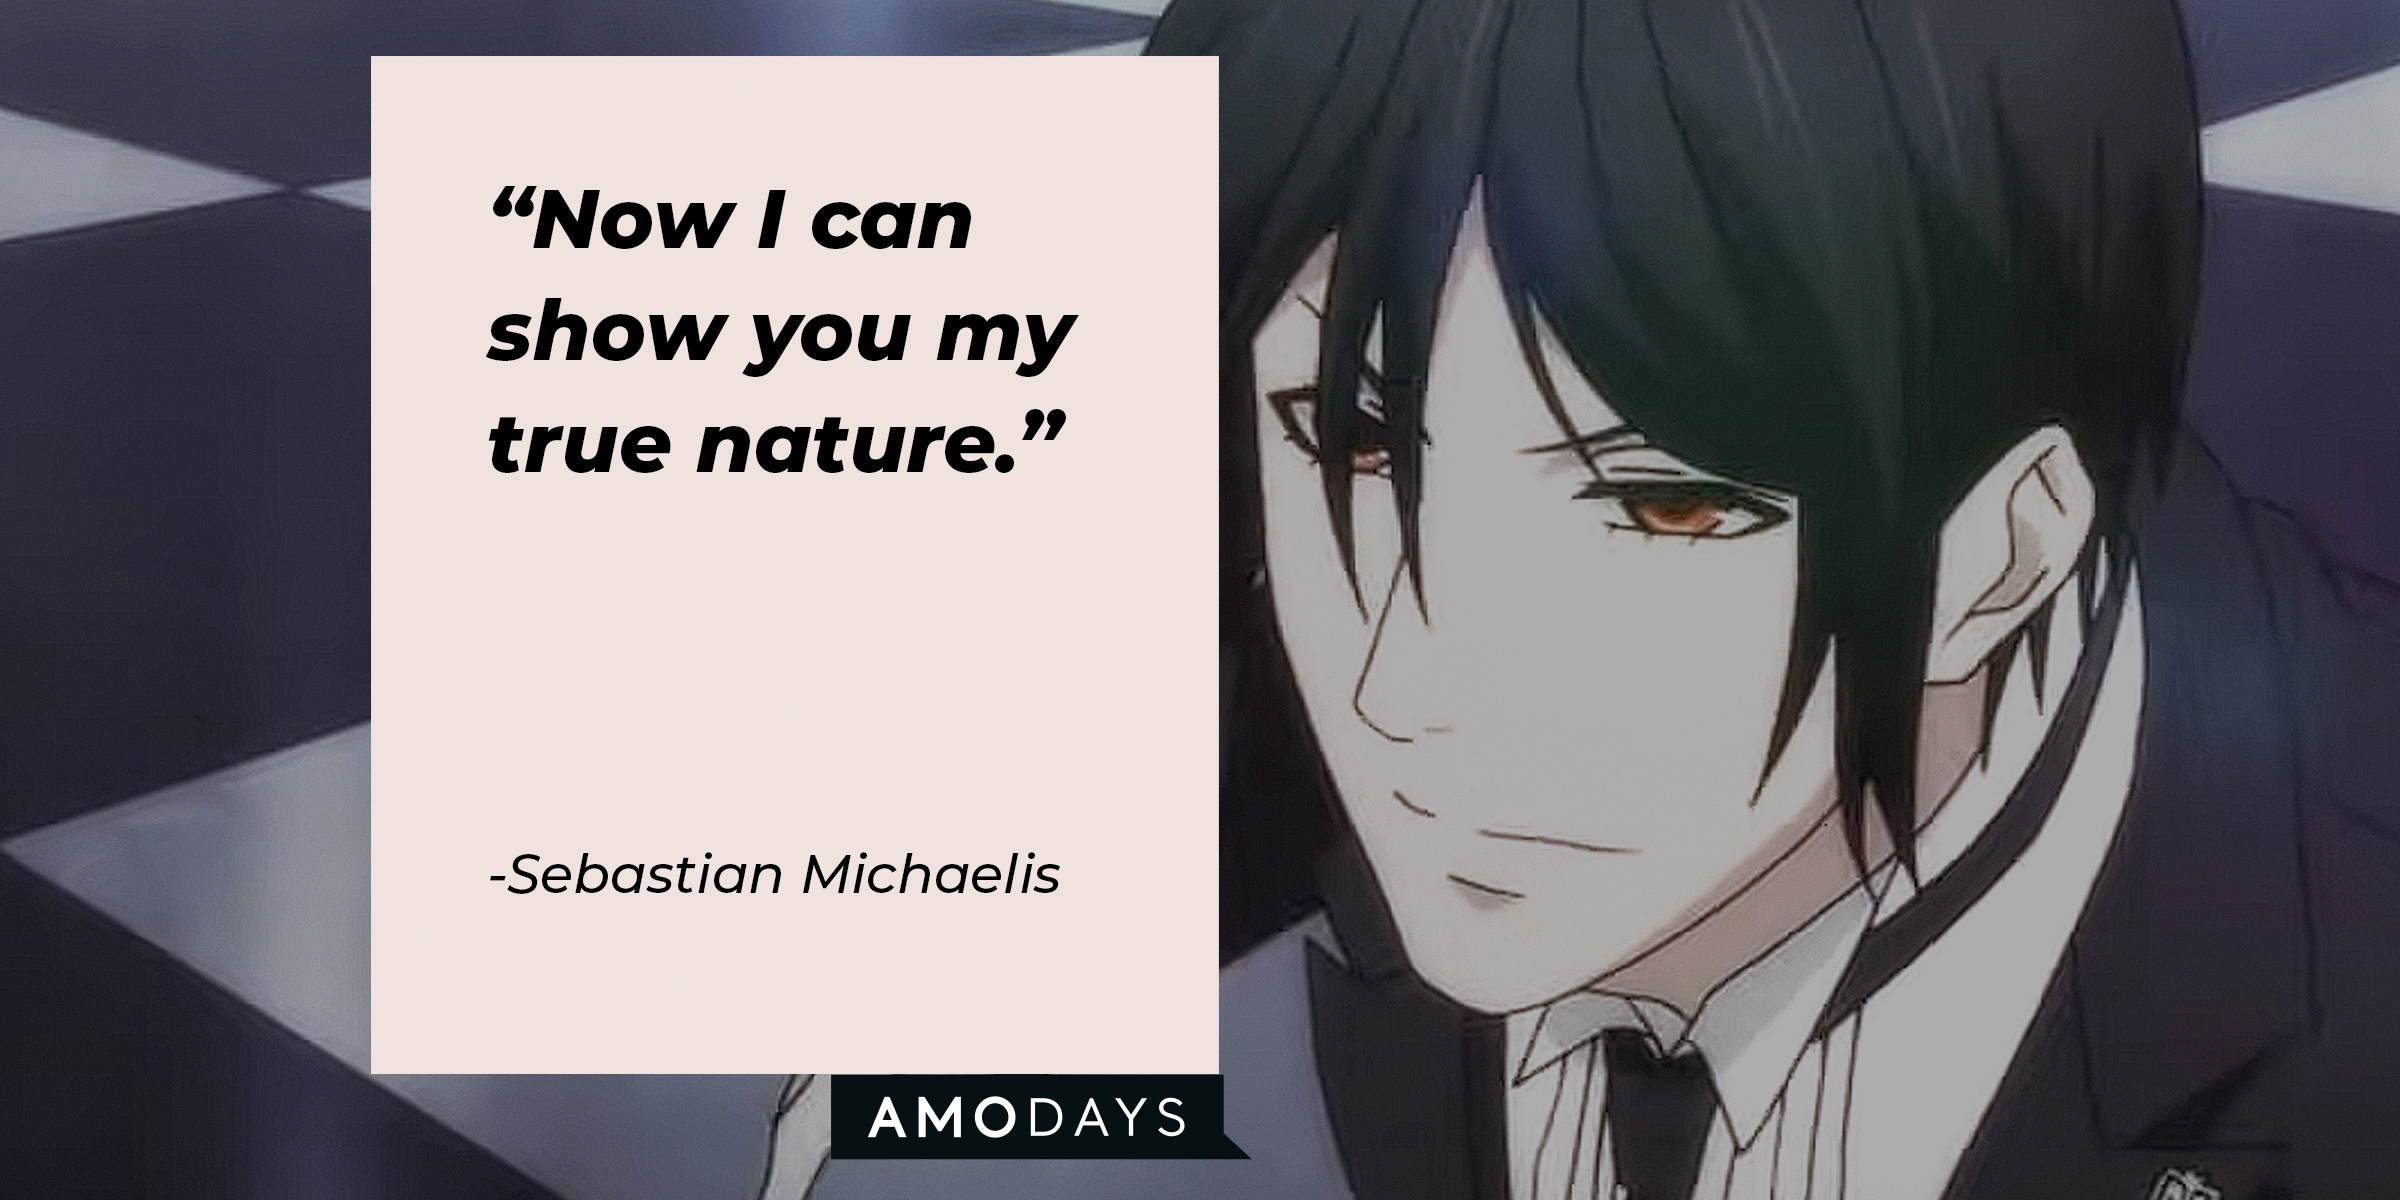 An image of Sebastian Michaelis from "Black Butler" with the quote: "Now I can show you my true nature." | Source: youtube.com/Crunchyroll Dubs